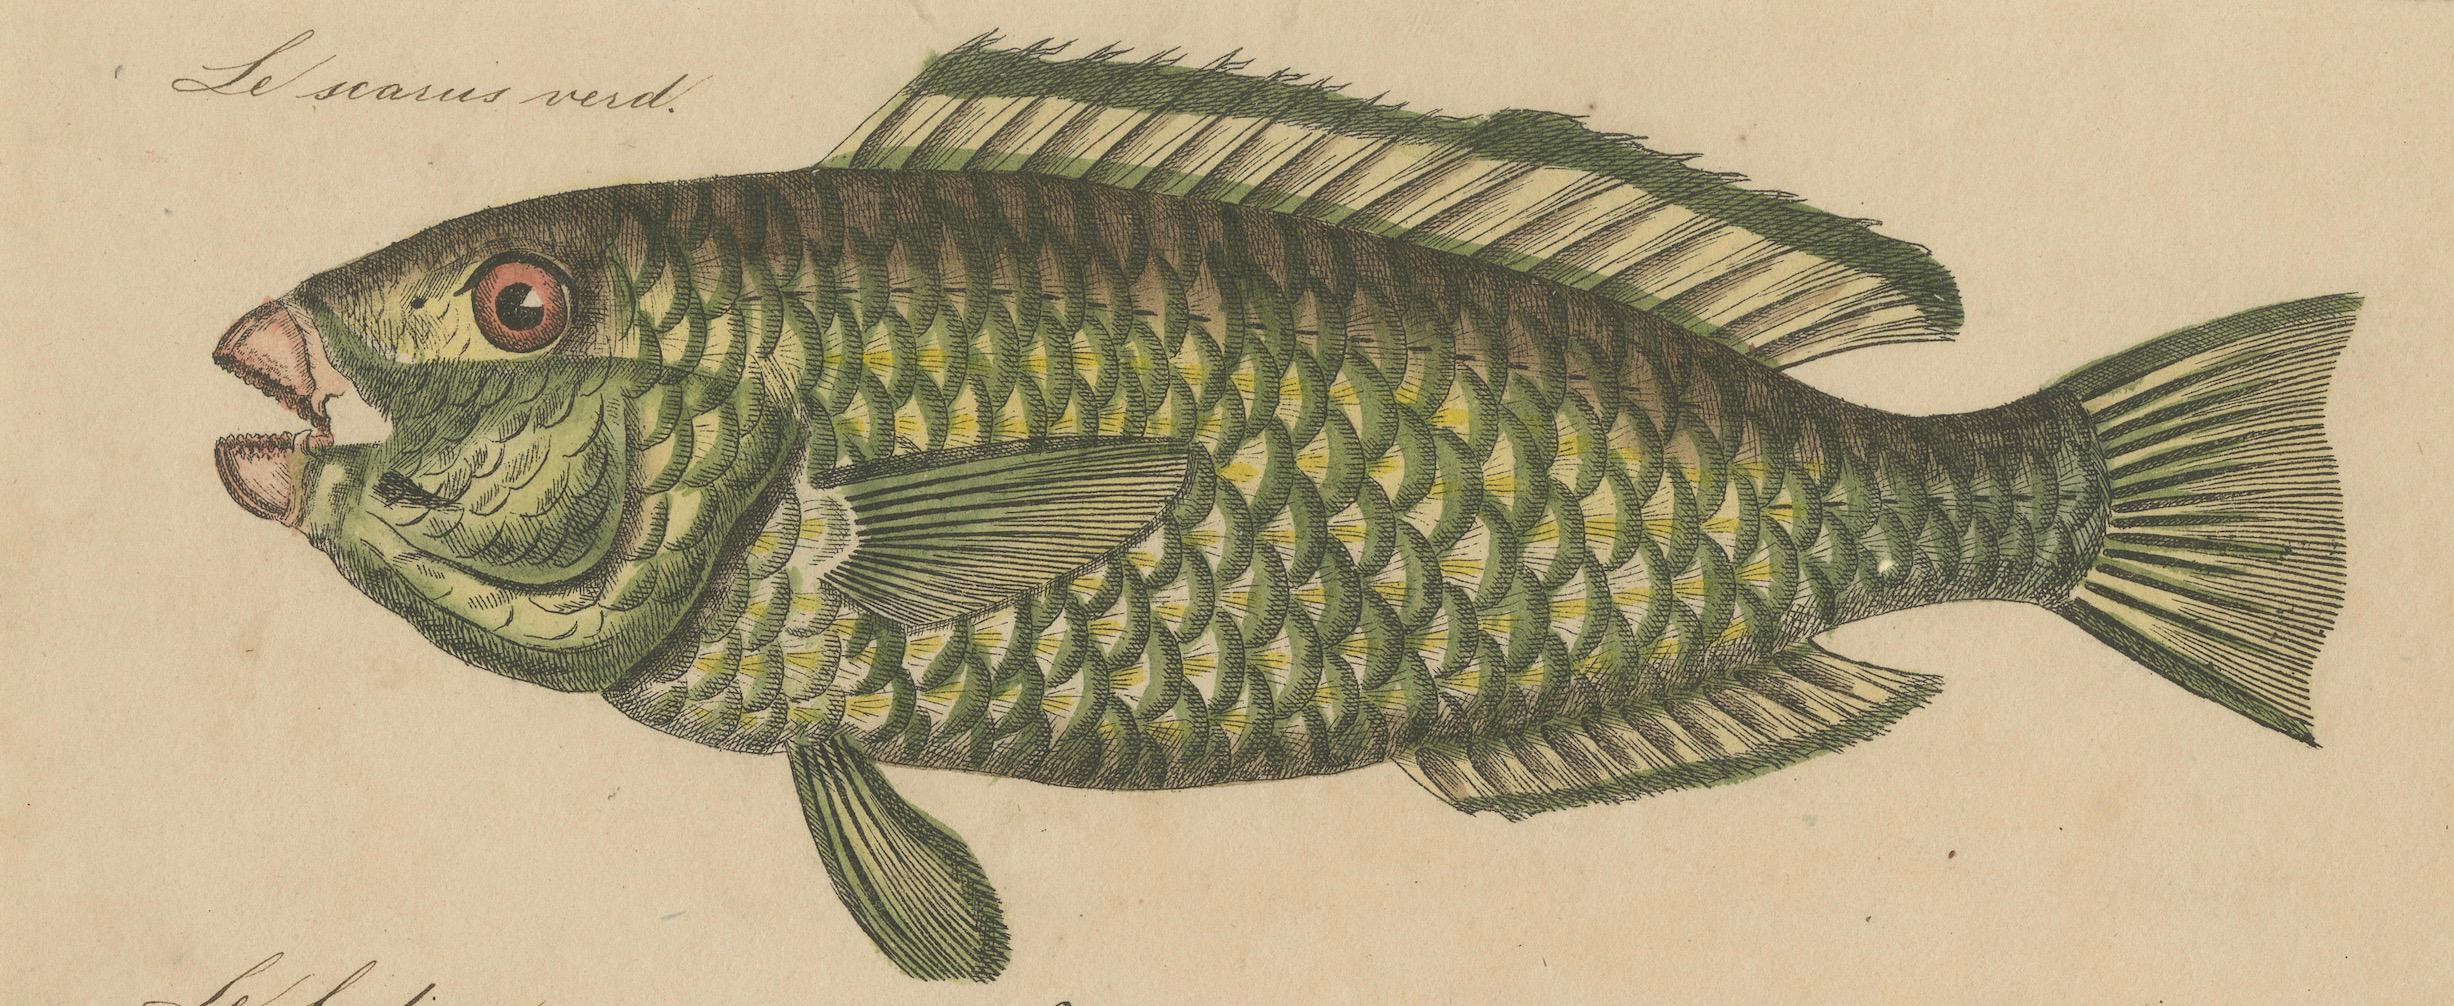 Paper 1819 Marine Splendor: Original Hand-Colored Engravings of Fishes For Sale